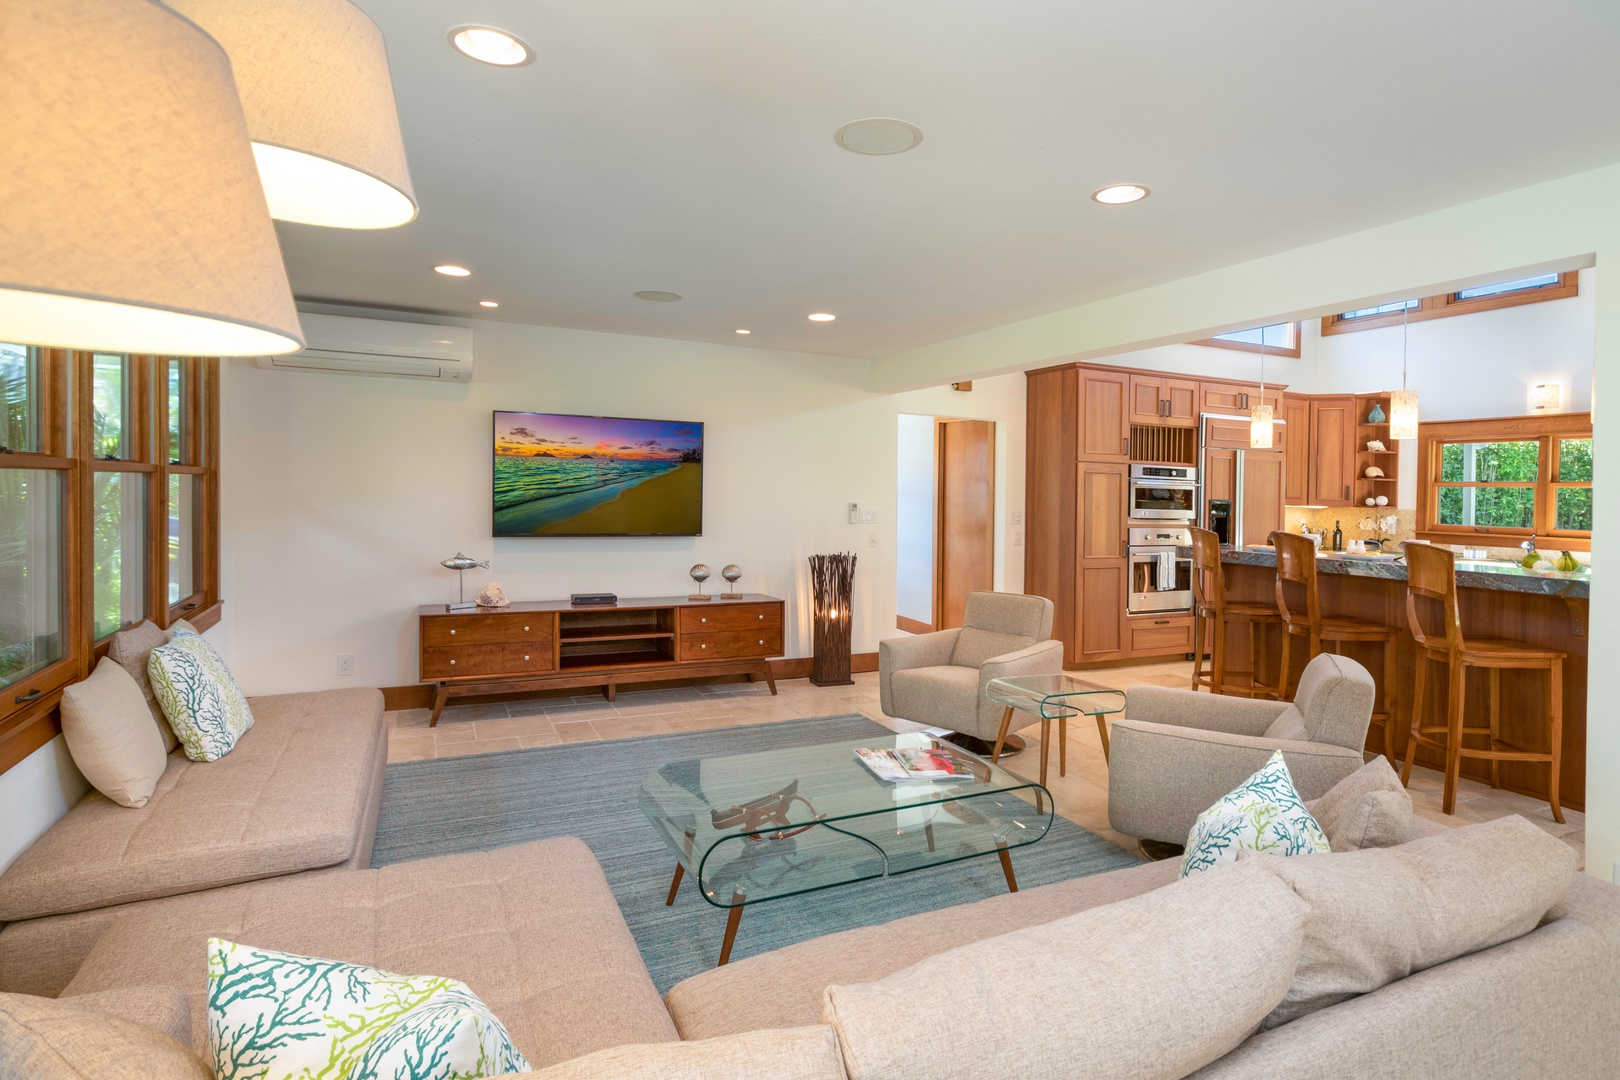 Honolulu Vacation Rentals, Hale Niuiki - Unwind in the integrated living space, featuring a spacious L-shaped couch for group movie nights, seamlessly connected to the kitchen and dining areas.